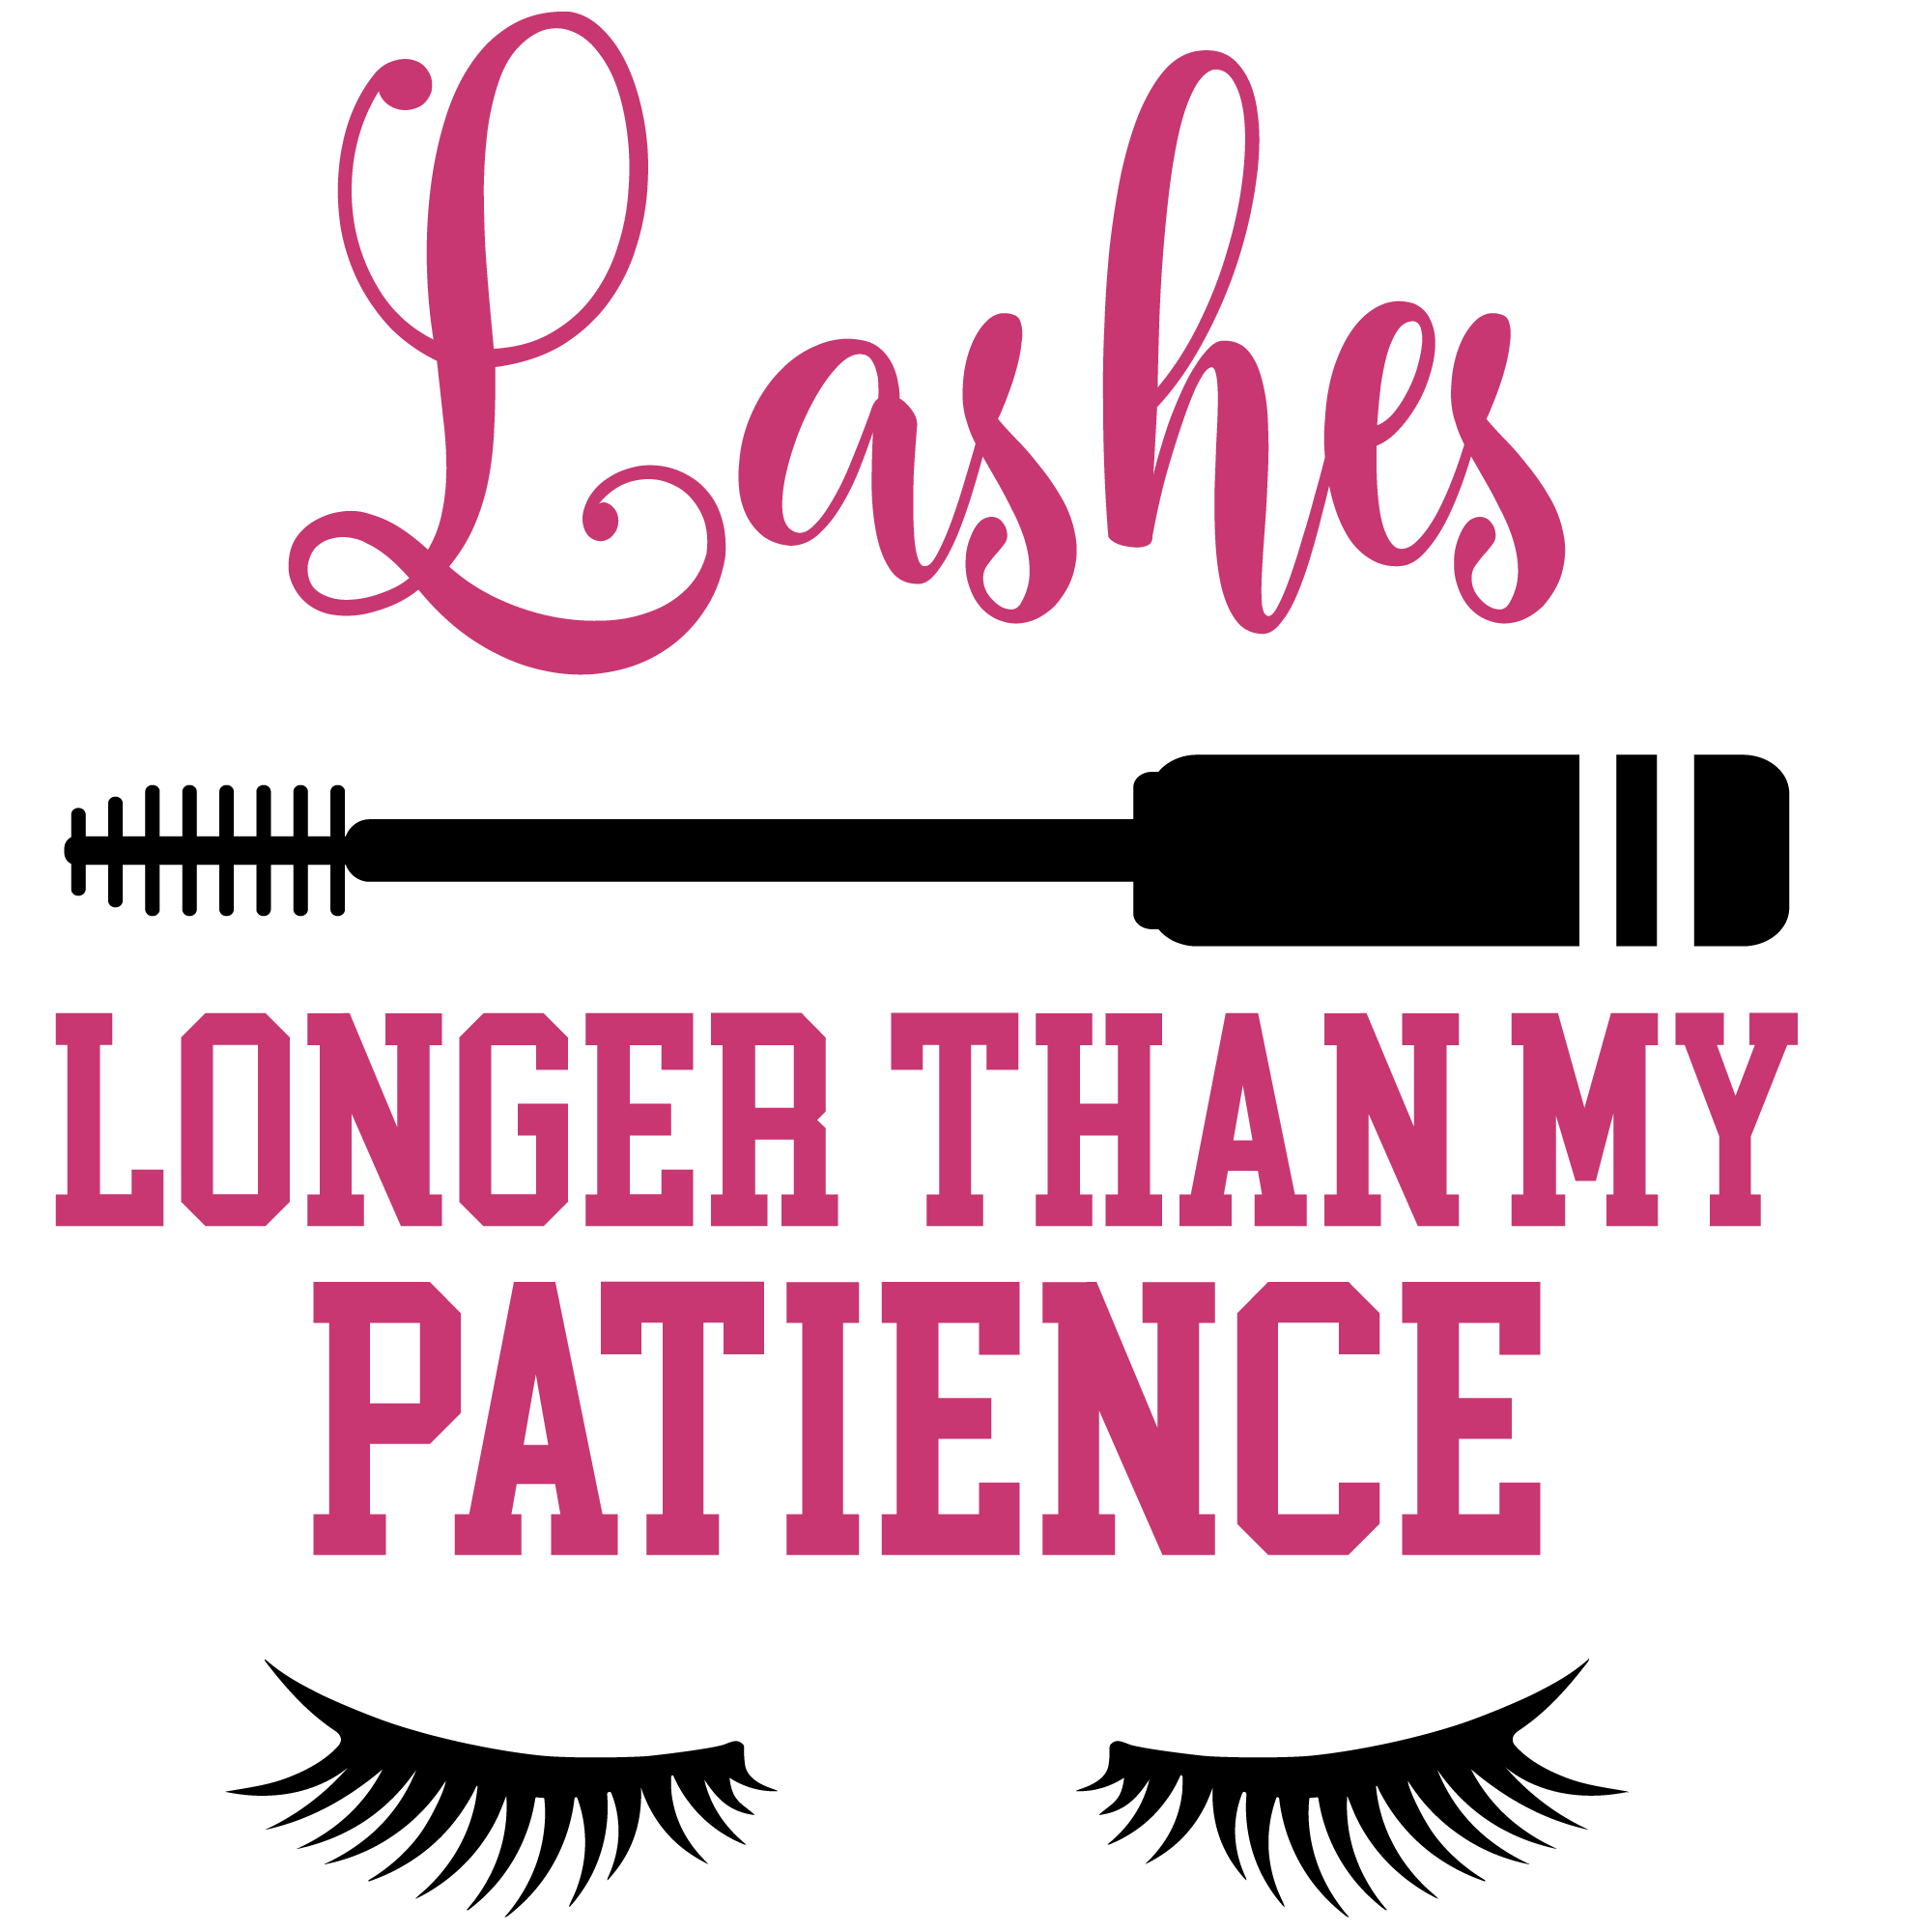 Lashes longer than my patience iron on heat transfers